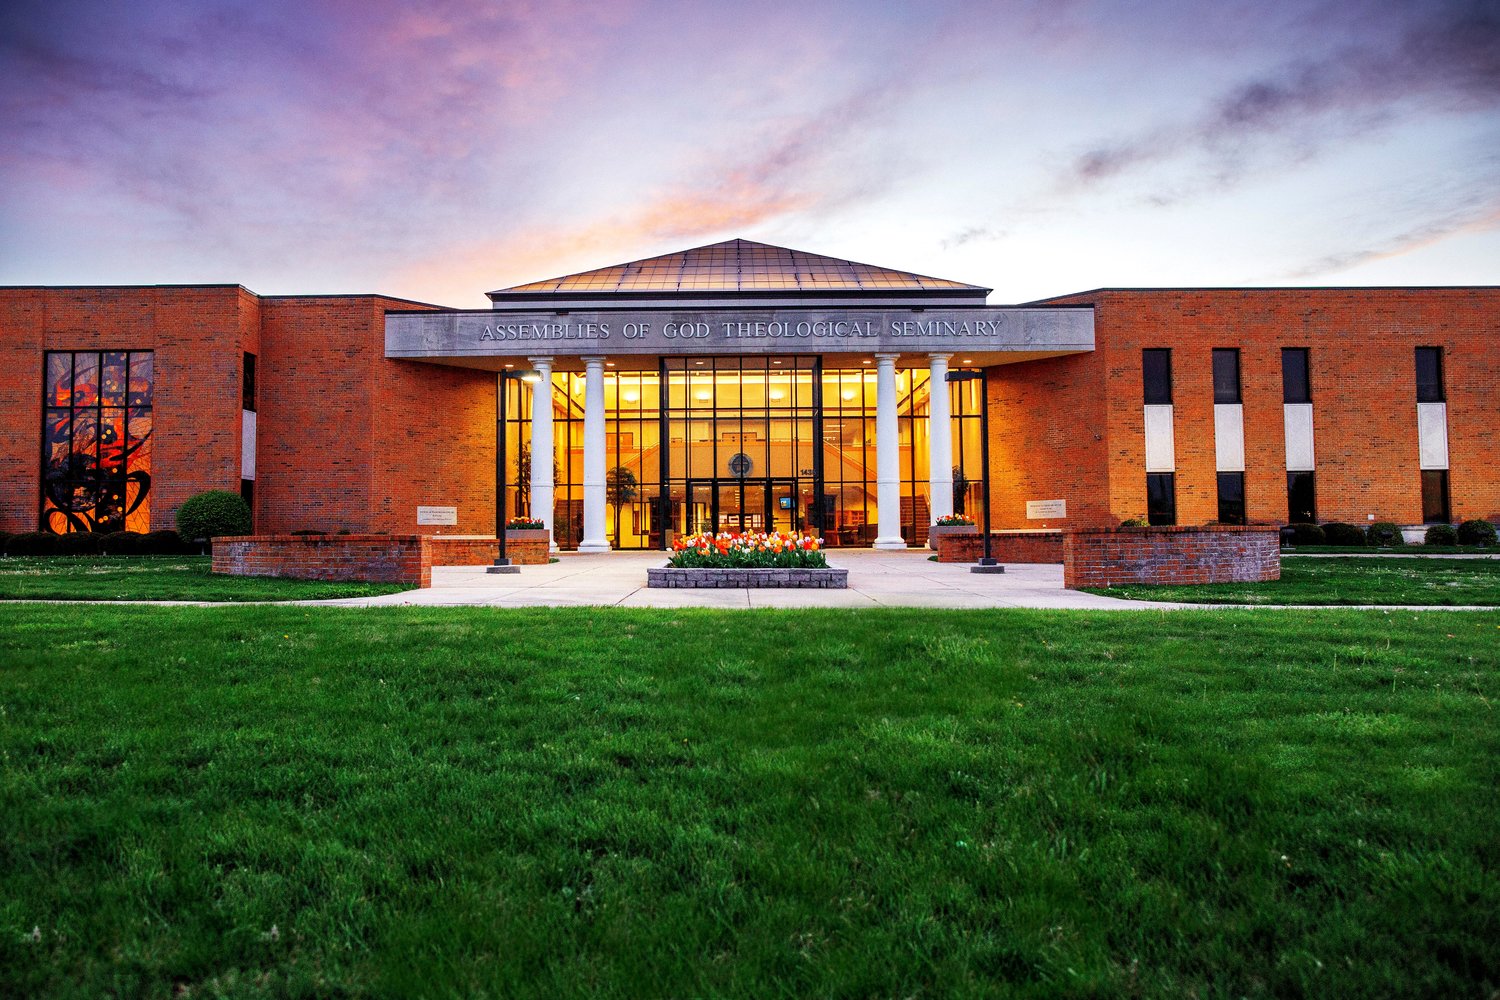 The grant focuses on underserved student groups at the Assemblies of God Theological Seminary.